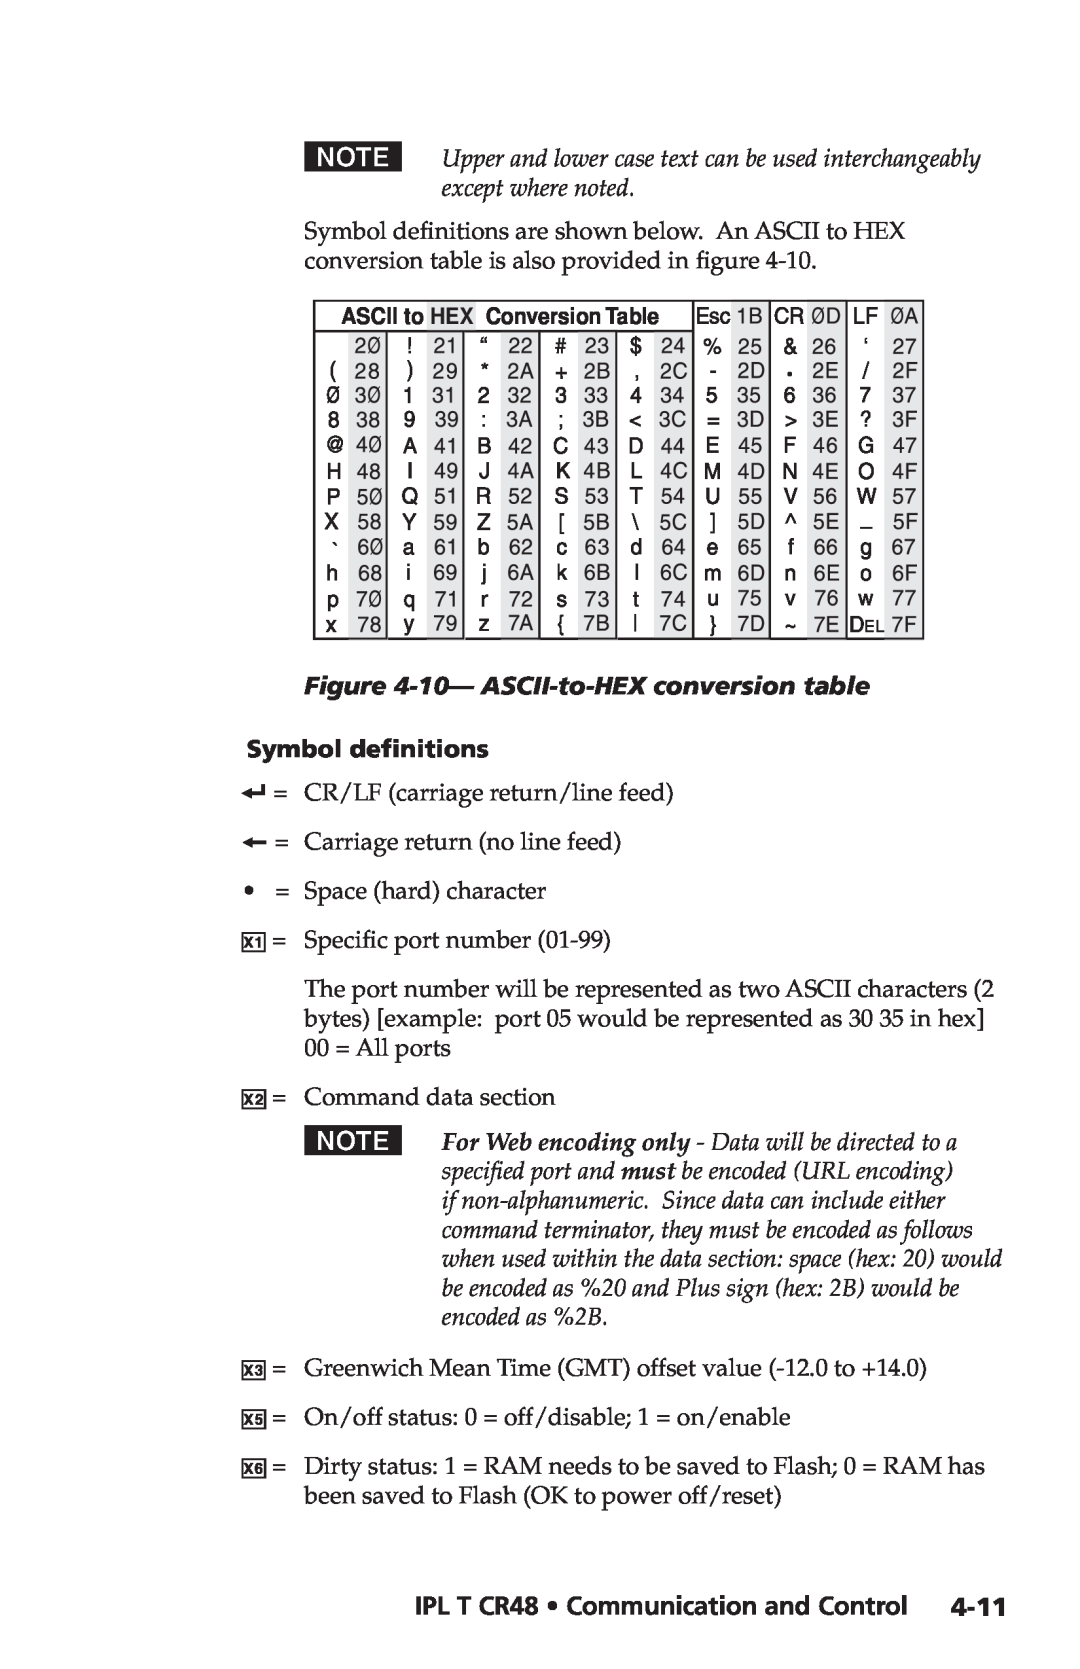 Extron electronic manual IPL T CR48 Communication and Control, 10- ASCII-to-HEX conversion table, Symbol definitions 